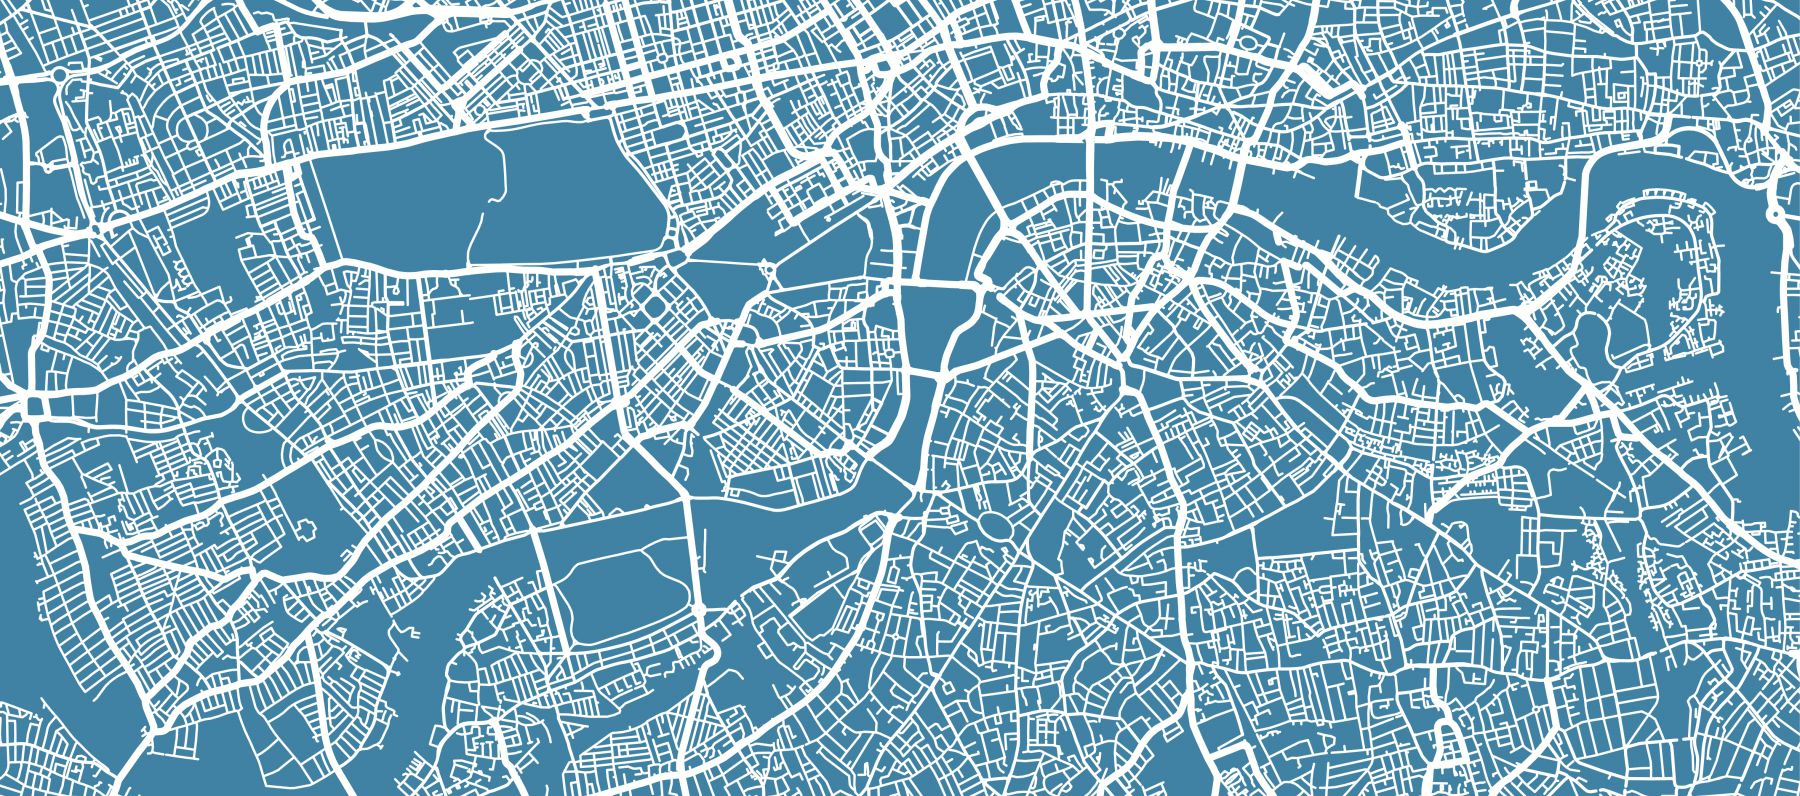 Geospatial Excellence in Cities